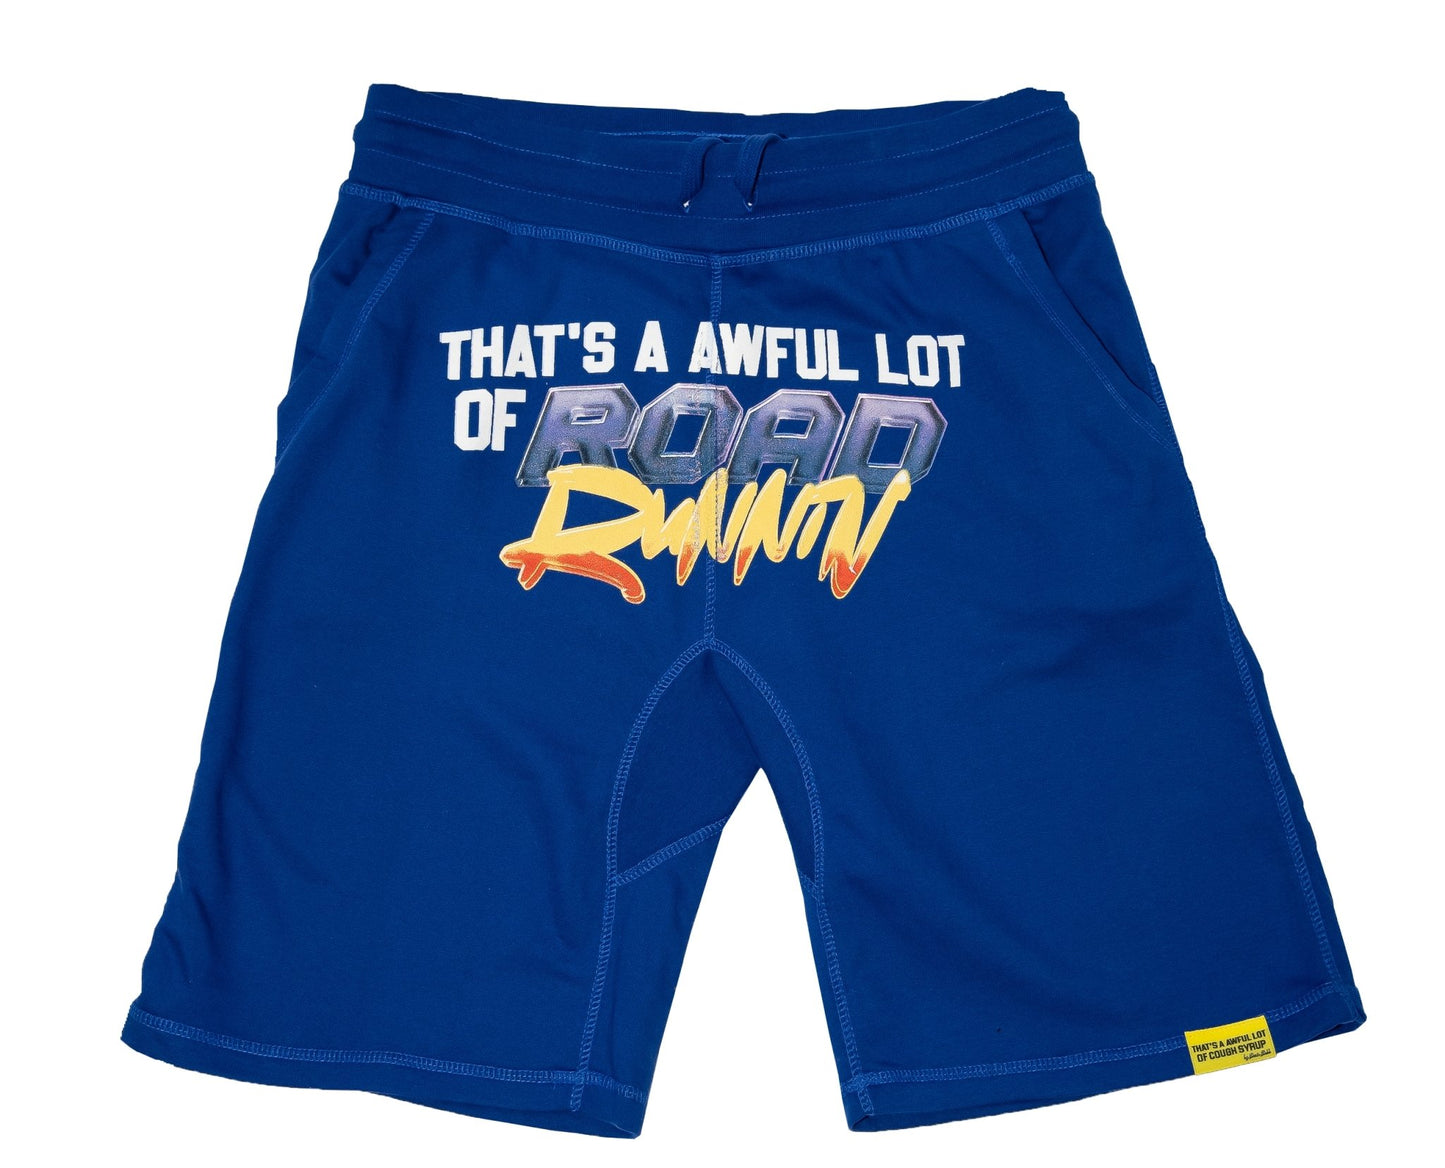 That’s A Awful Lot Of Road Runnin Shorts BLUE - Road Runners World Global